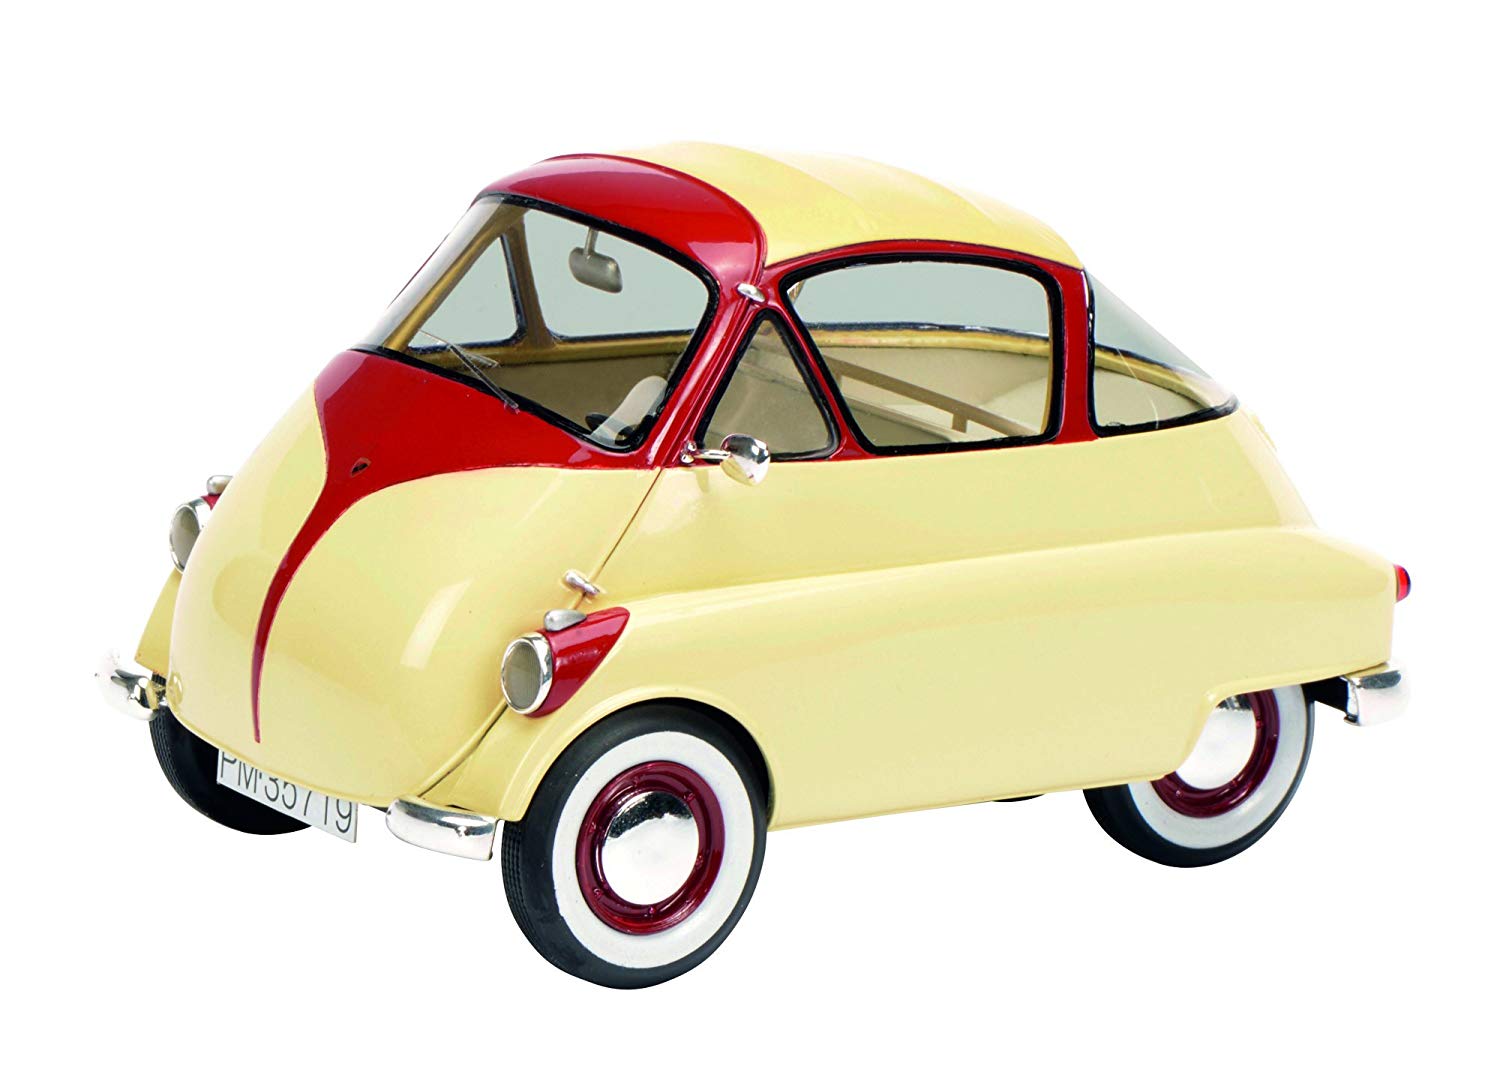 Schuco 450008700 Iso Isetta Car, 1: 18 Ivory/Red